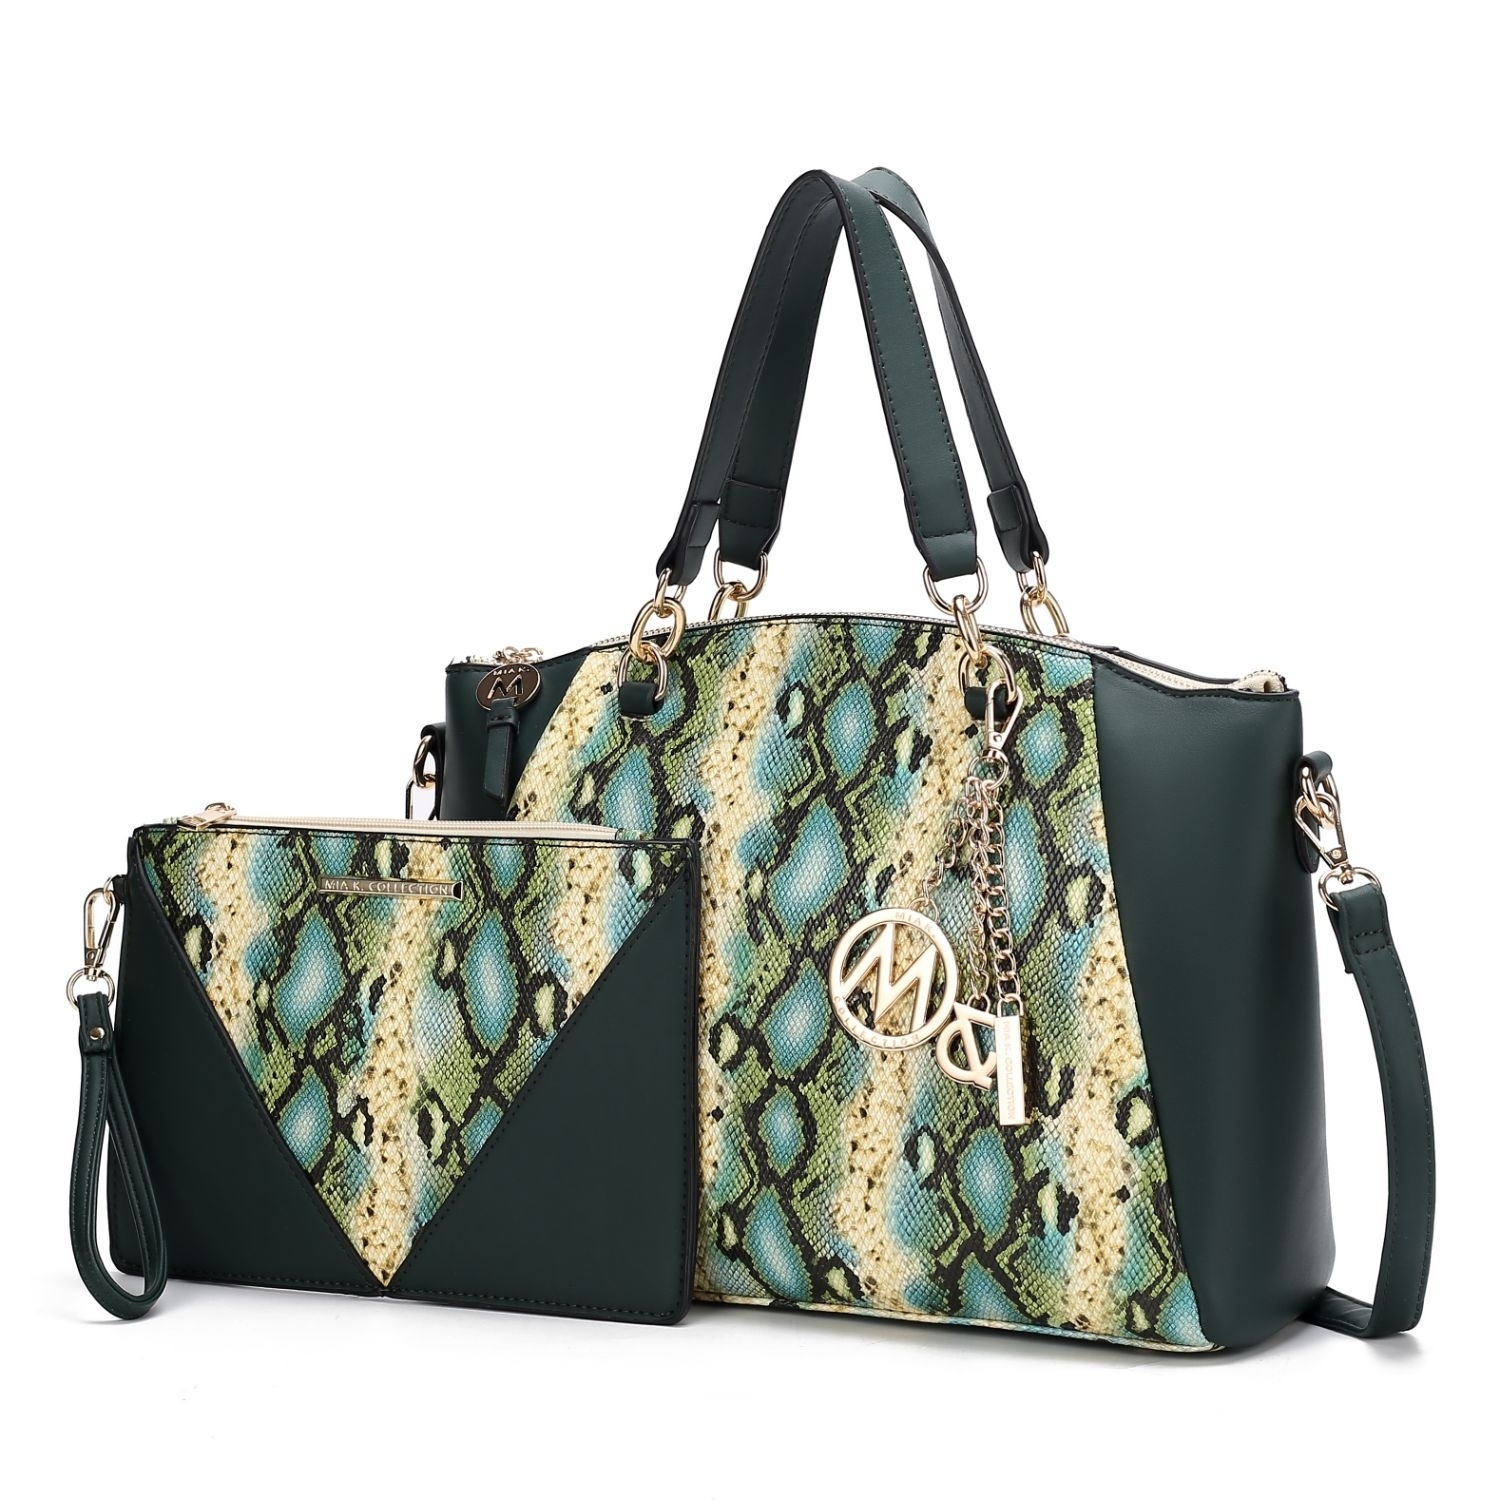 MKF Collection Addison Snake Embossed Vegan Leather Women's Tote Bag With Matching Wristlet By Mia K- 2 Pieces - Dark Green